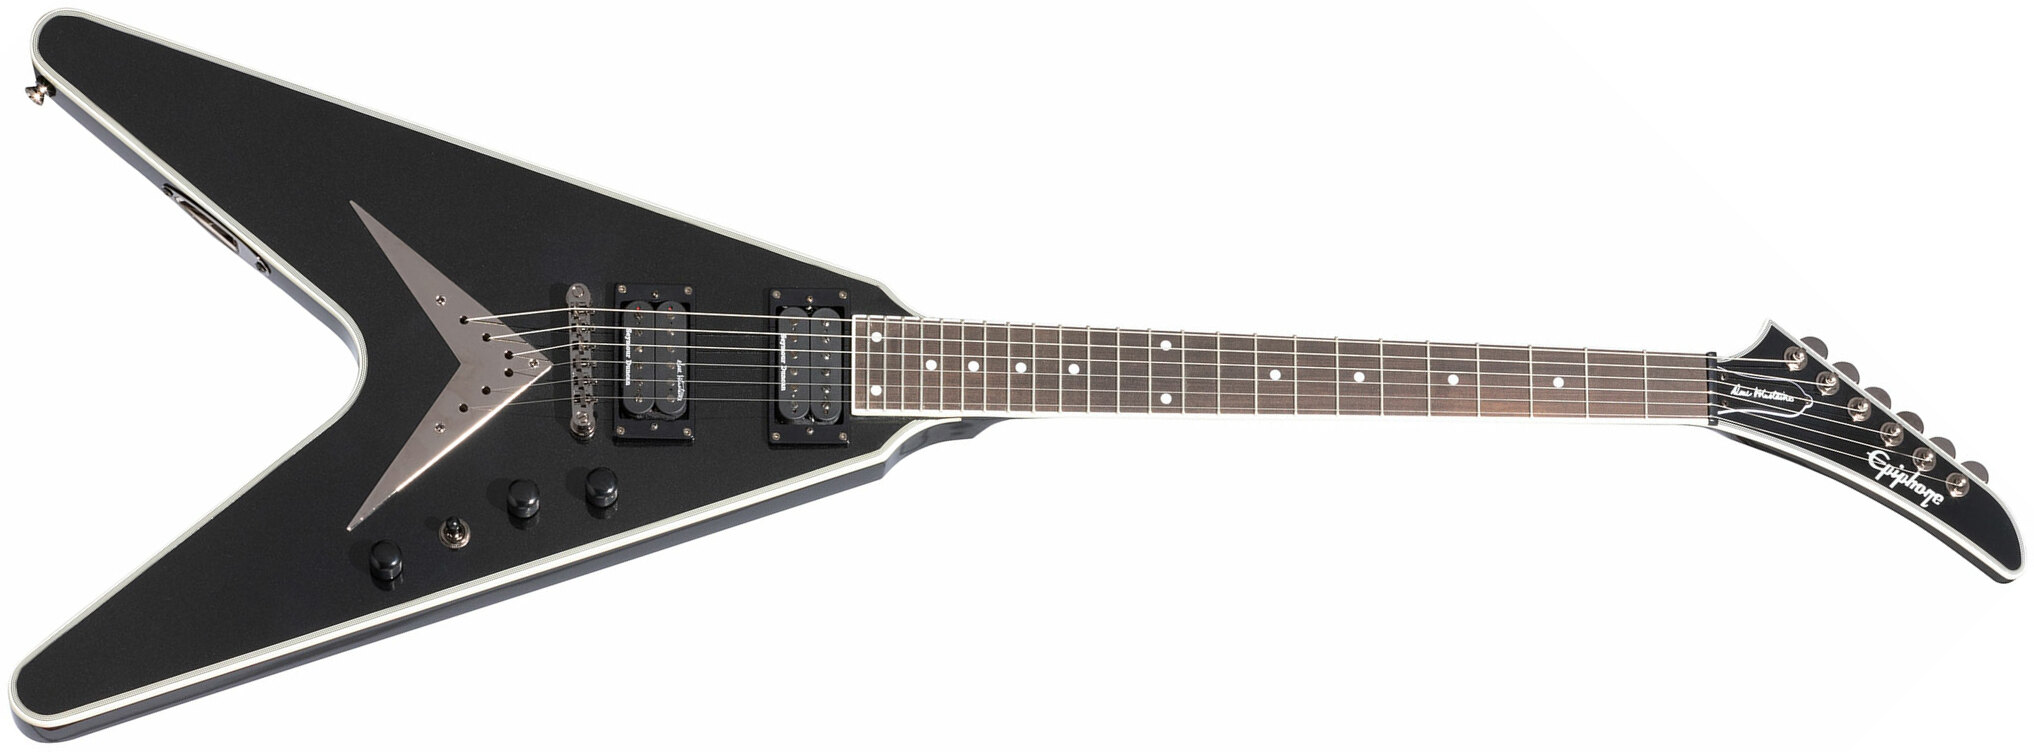 Epiphone Dave Mustaine Flying V Prophecy 2h Fishman Fluence Ht Eb - Black Metallic - Guitarra electrica metalica - Main picture